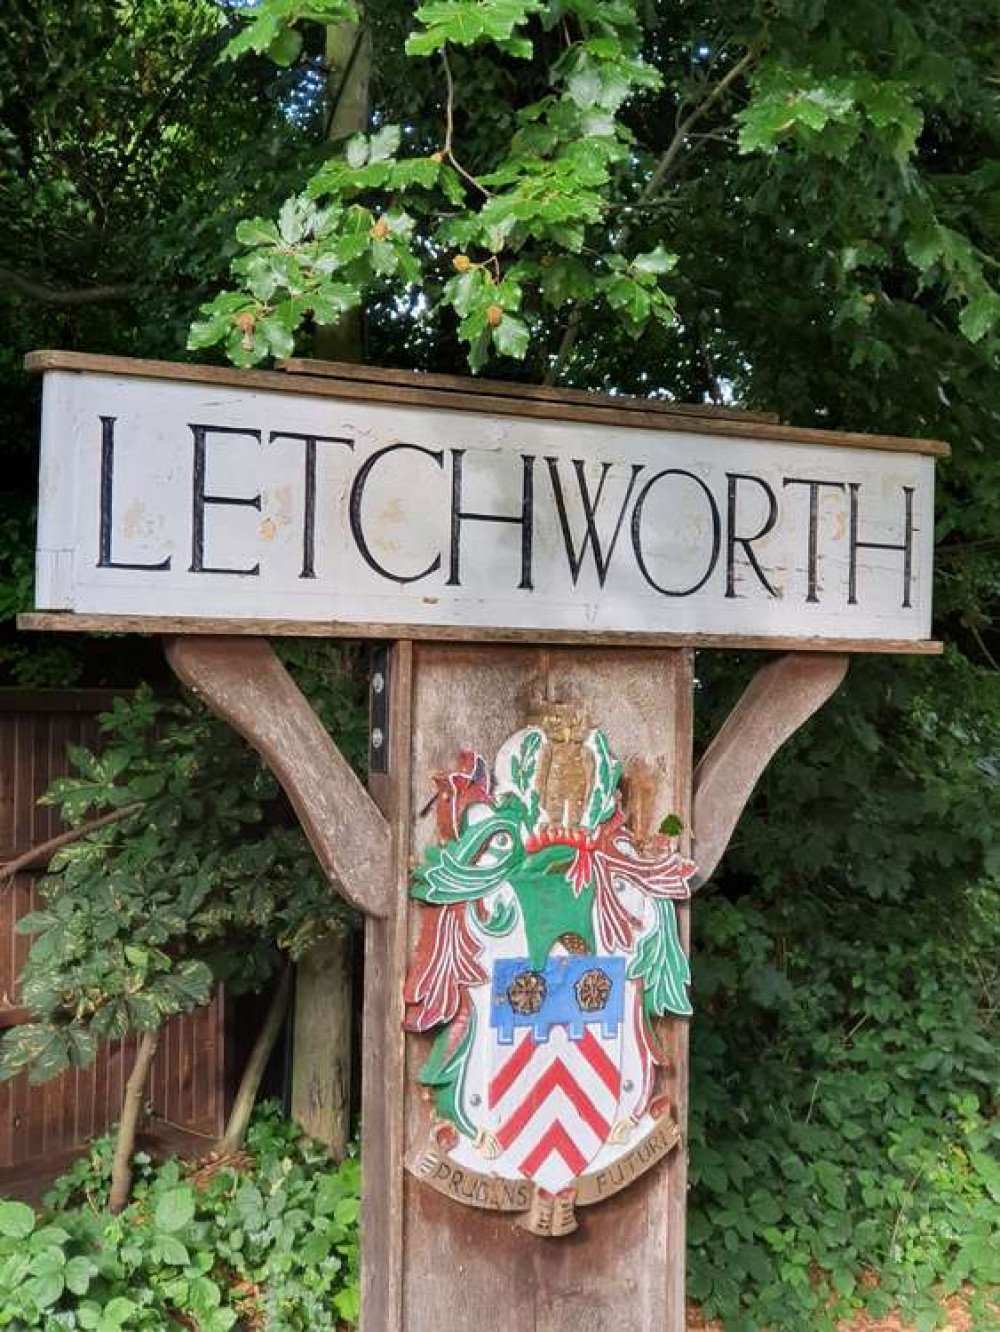 Hitchin Nub News has been such a hit we're launching Letchworth Nub News - and we need your help! CREDIT: Letchworth Nub News